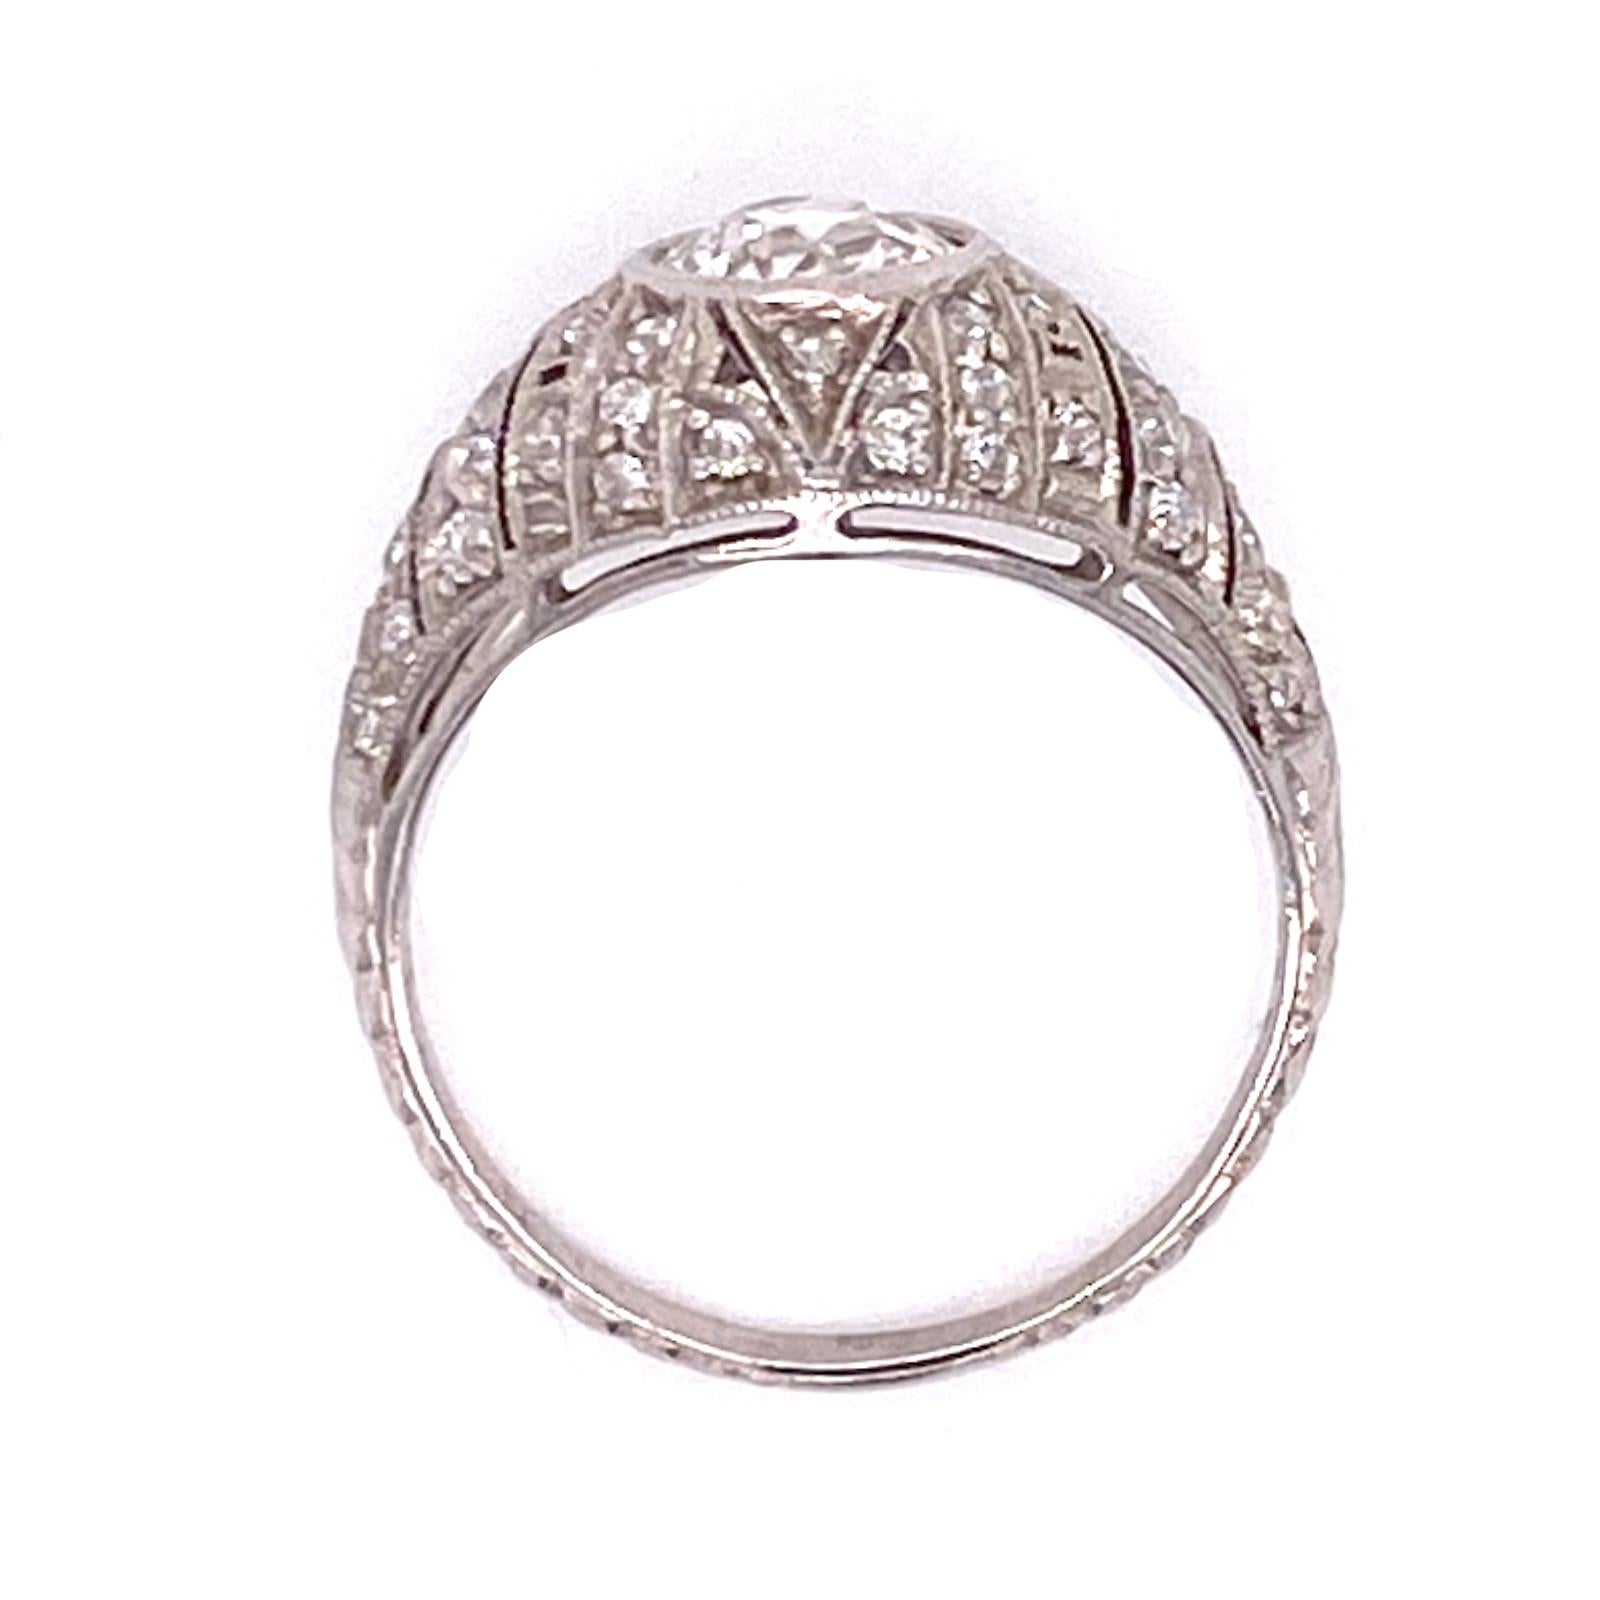 Beautiful Art Deco diamond engagement ring handmade in platinum. The Old European cut diamond weighs approximately 1.00 carat and is graded I color and SI1 clarity. The surrounding Old European cut diamonds in the mounting weigh approximately .50